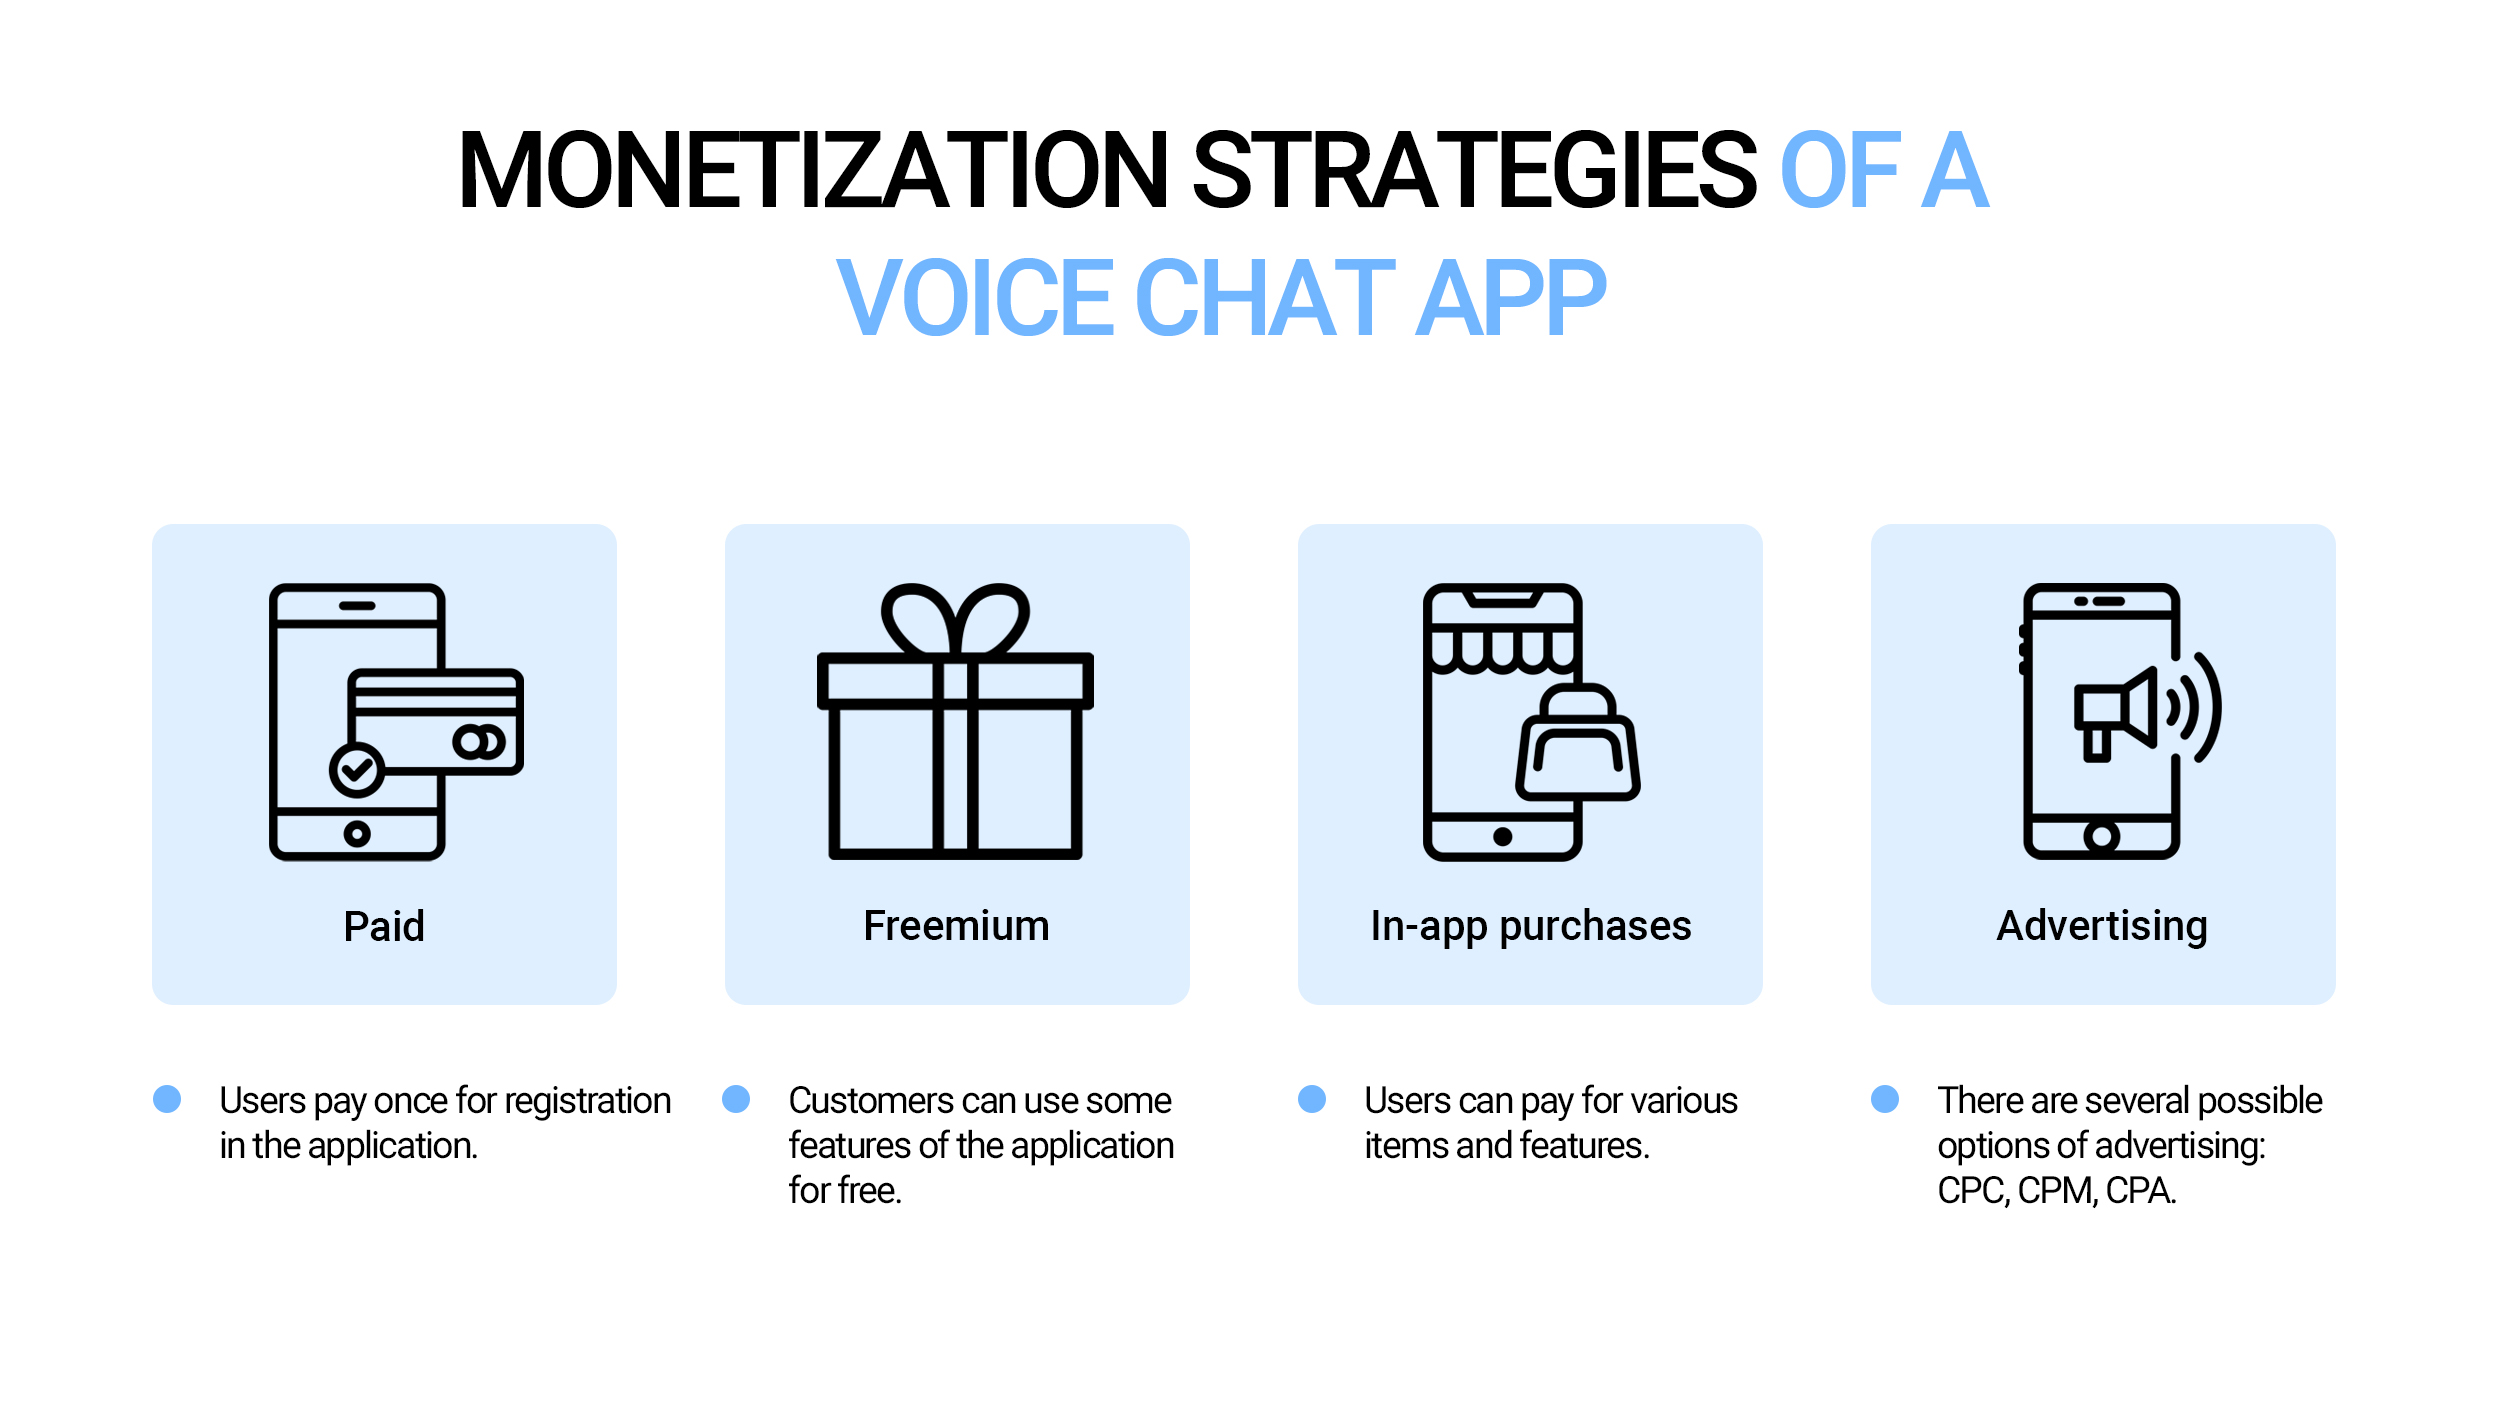 Monetization strategies of a voice chat app